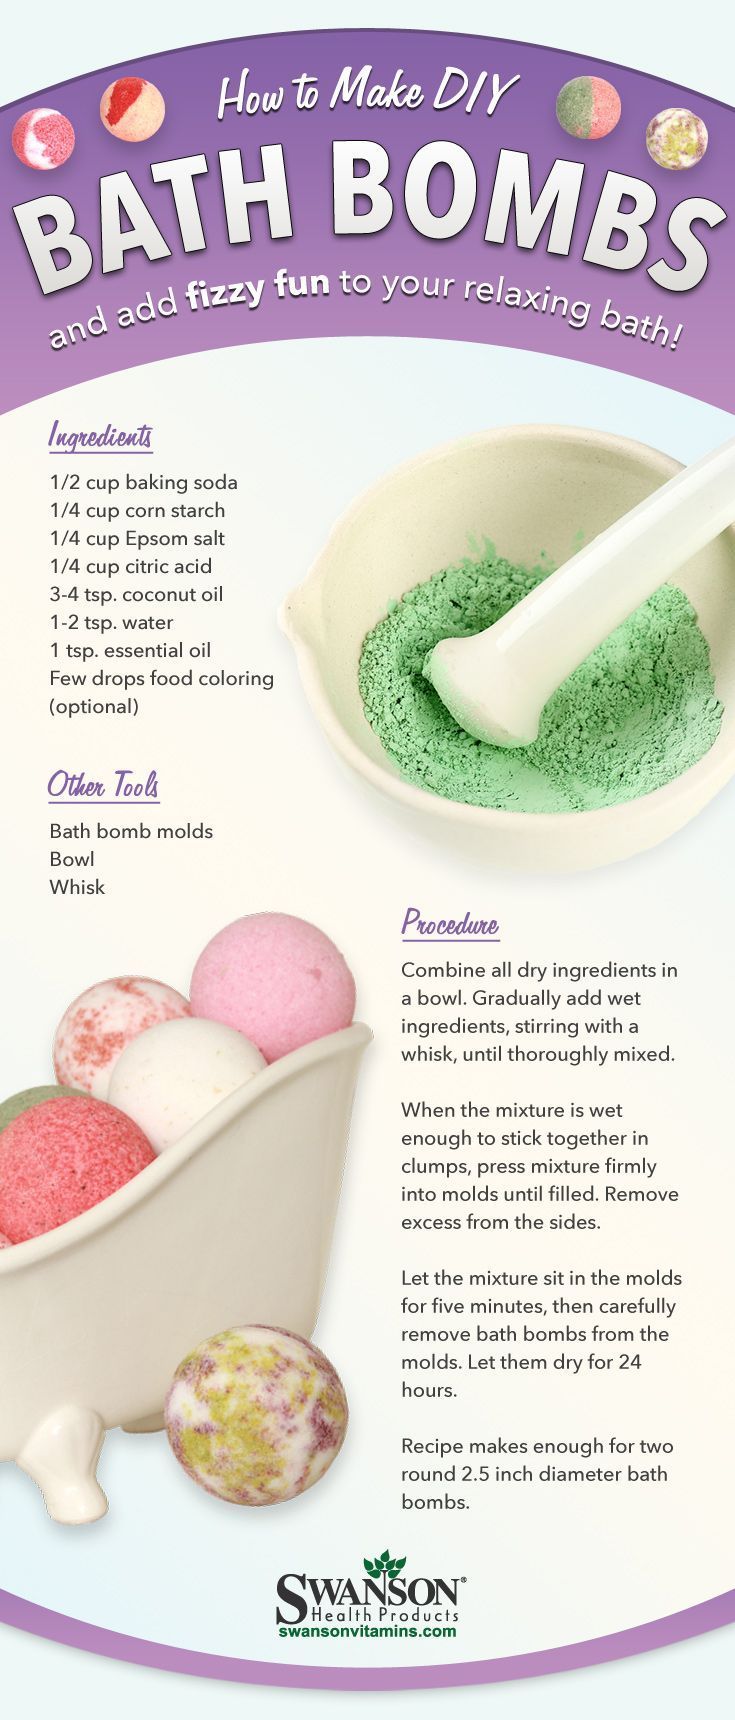 Get Free Traffic To Clickbank And DIY Bath Bomb Recipe | Swanson Health Products *** Find out even more by checking out the photo